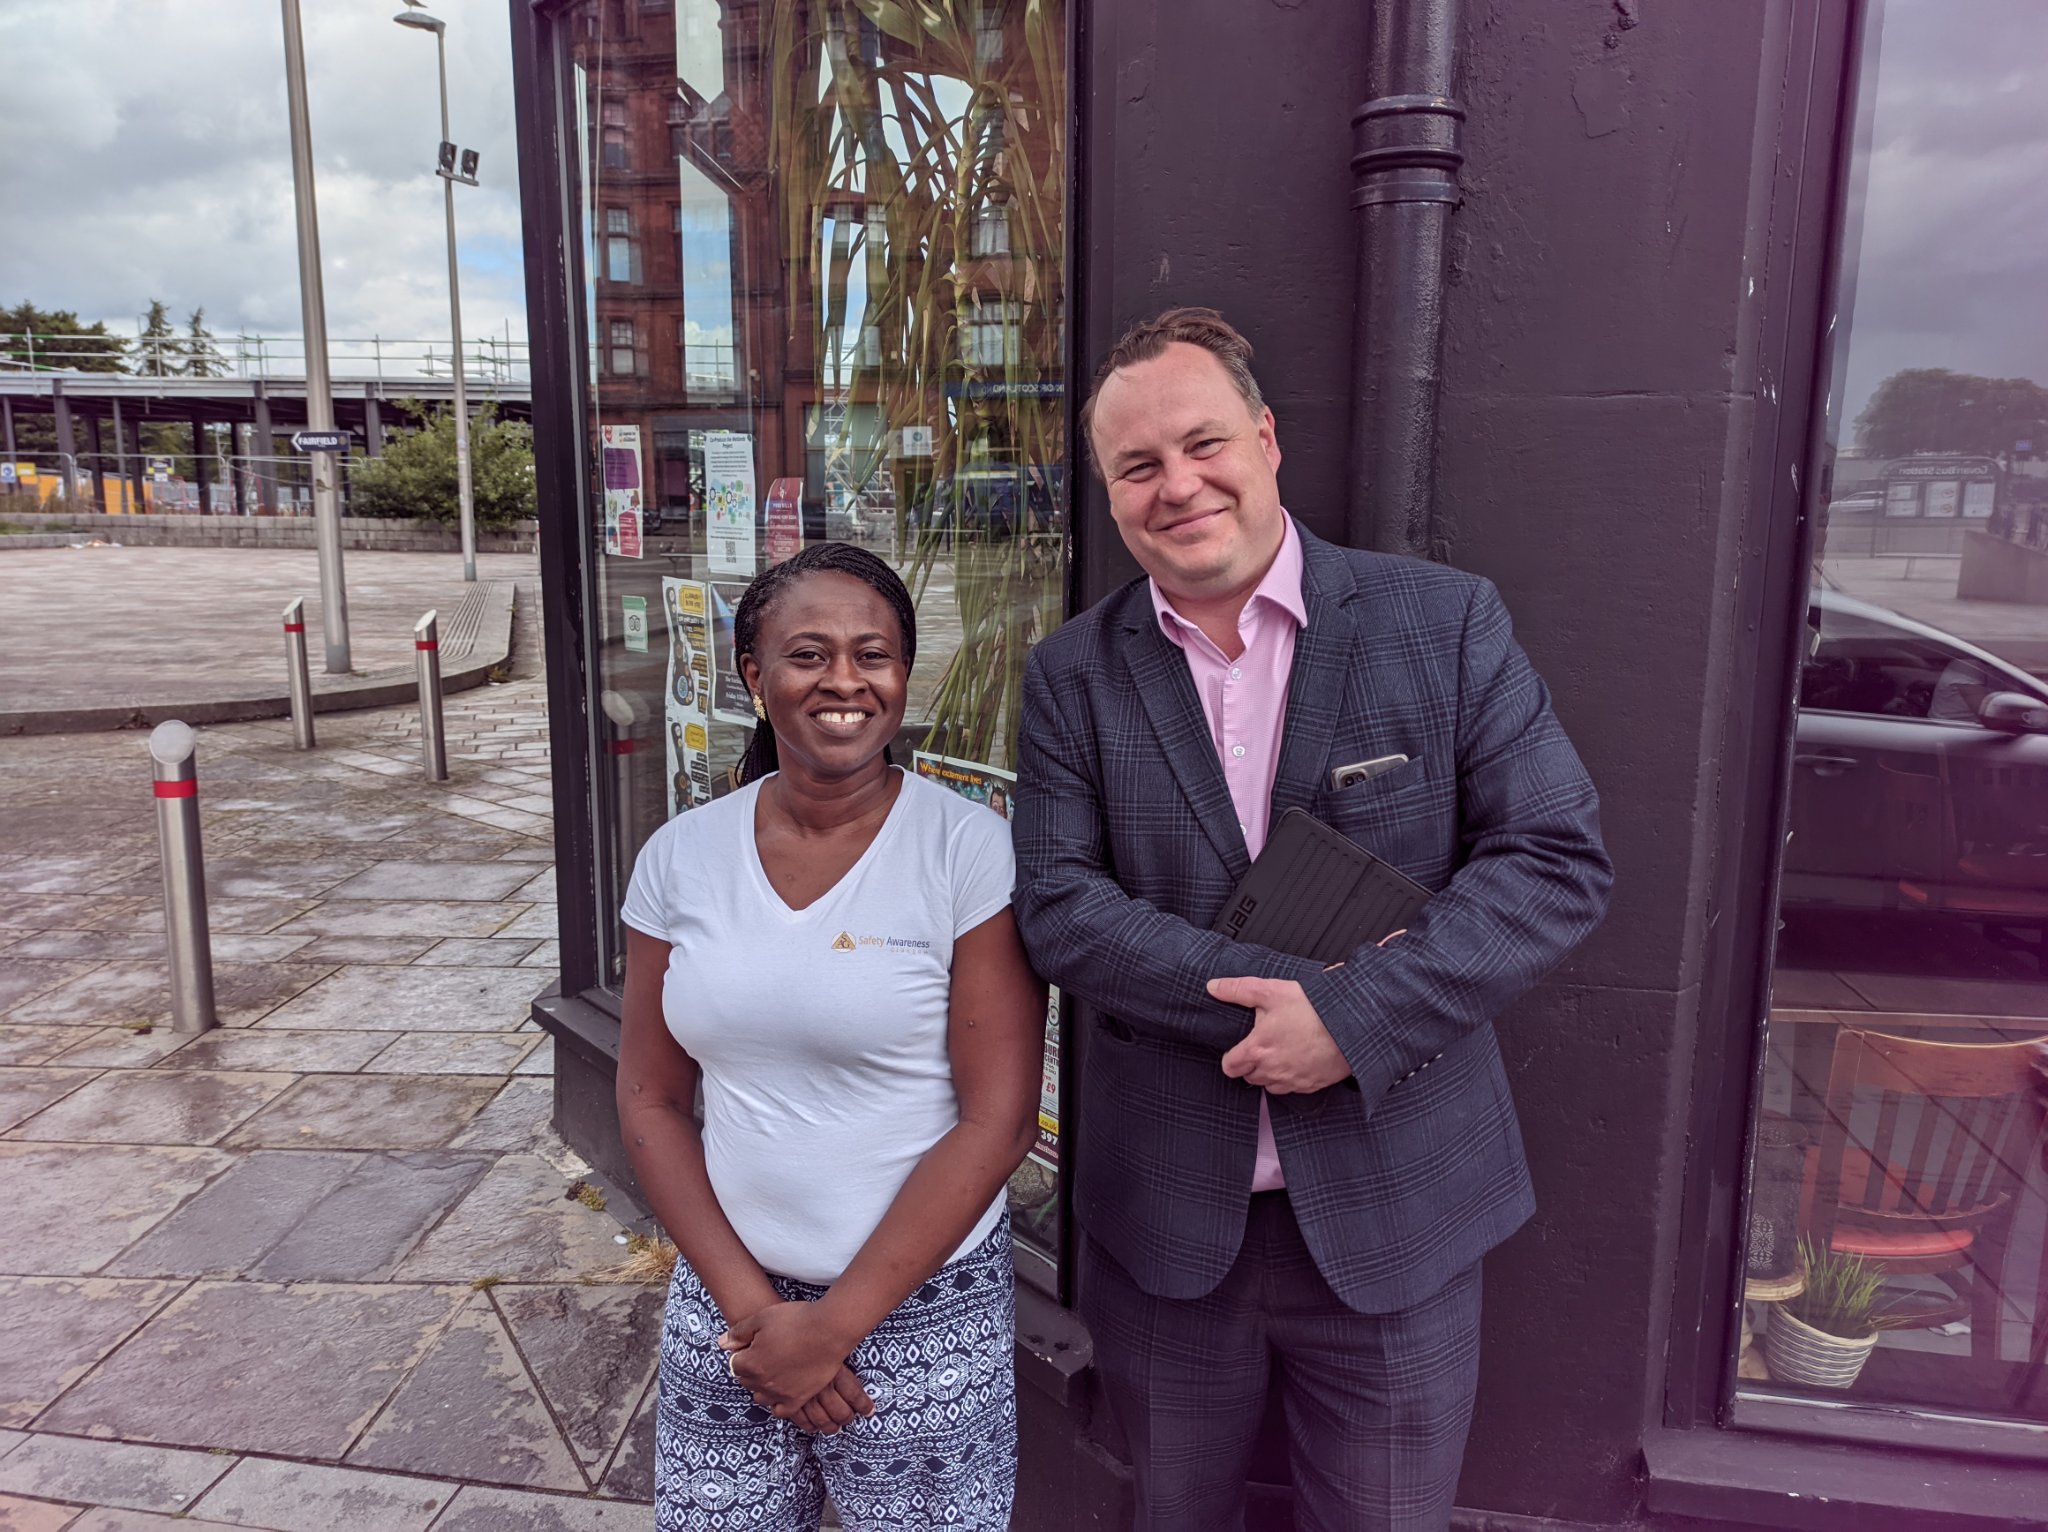 On Thursday I had a meeting with my constituent Funmi of Safety awareness Glasgow to discuss some of the local causes she is involved with including mental health projects, Asylum Seekers and local foodbanks.